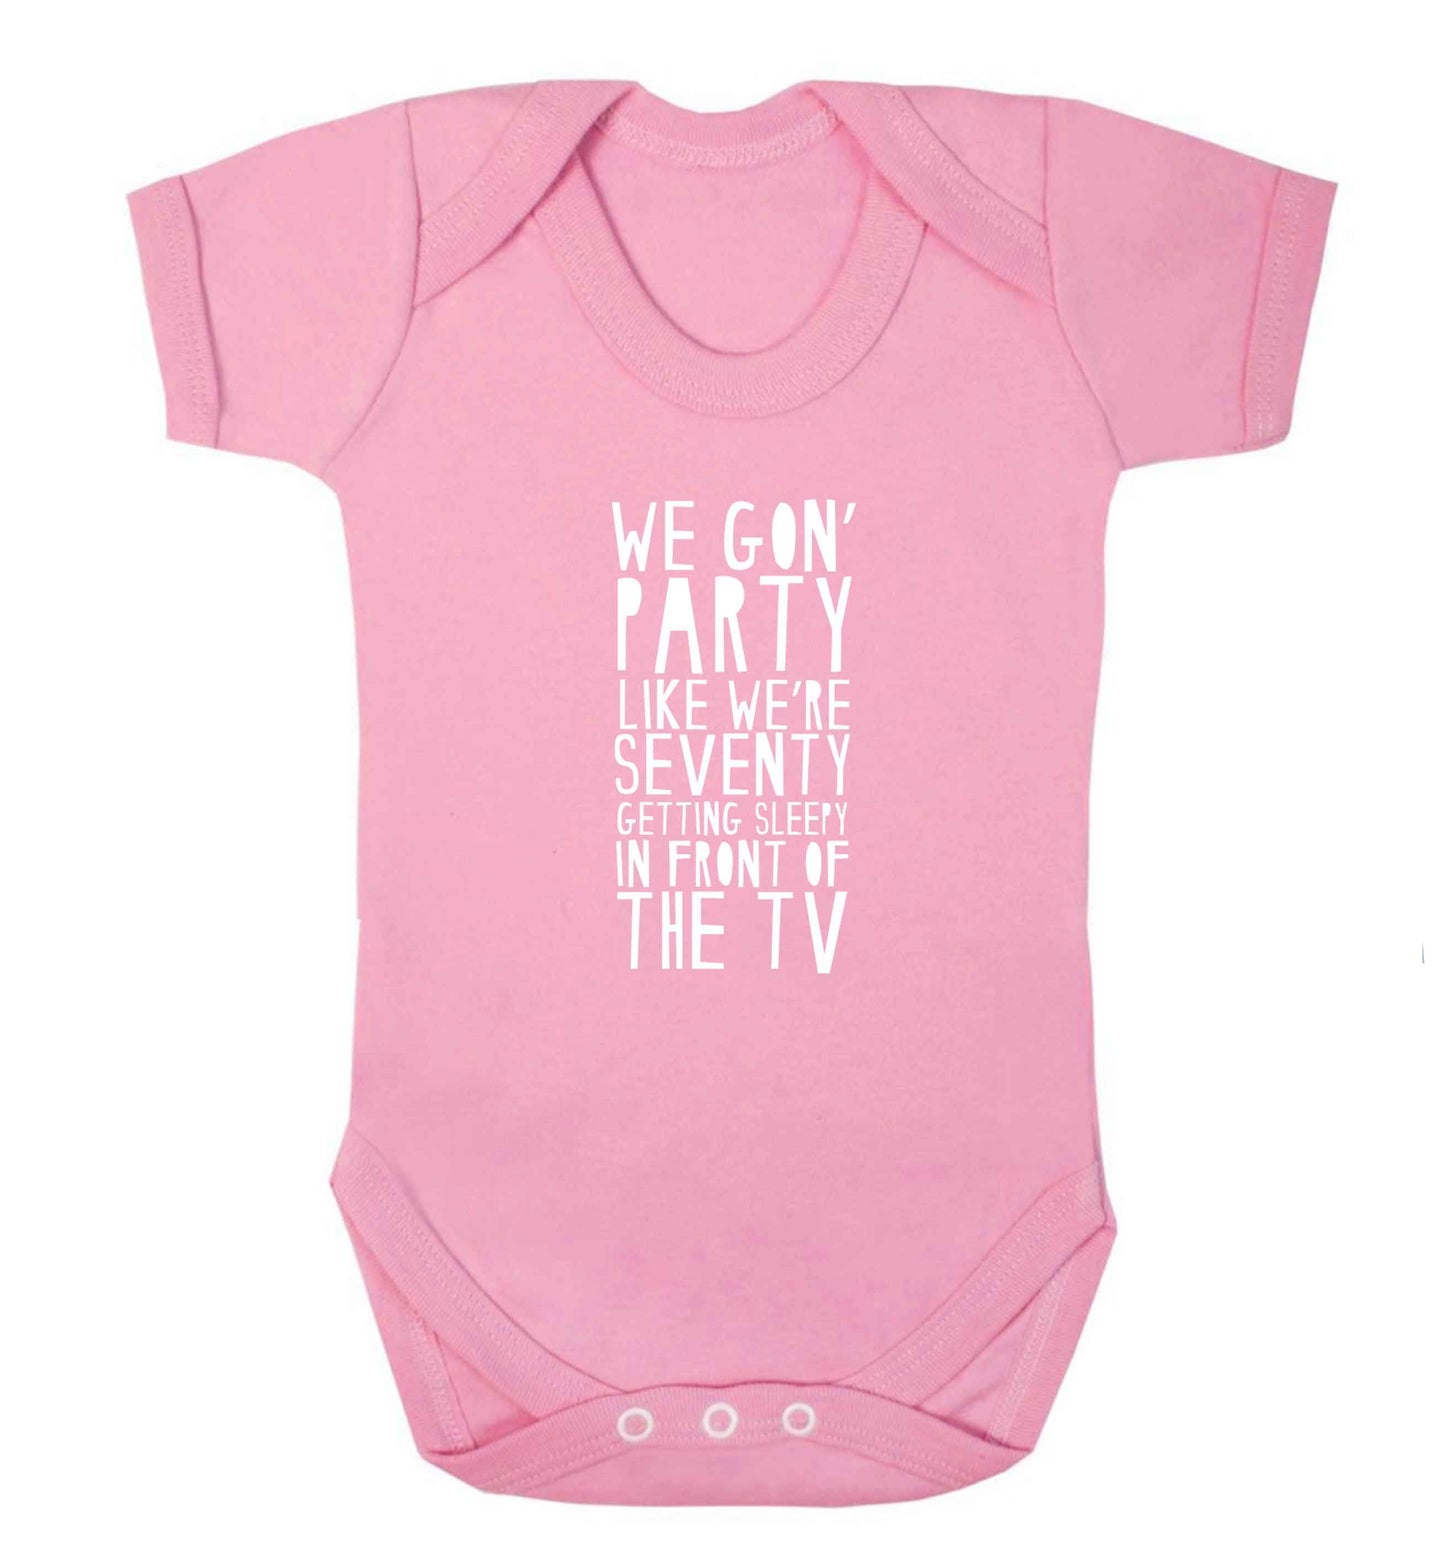 We gon' party like we're seventy getting sleepy in front of the TV baby vest pale pink 18-24 months